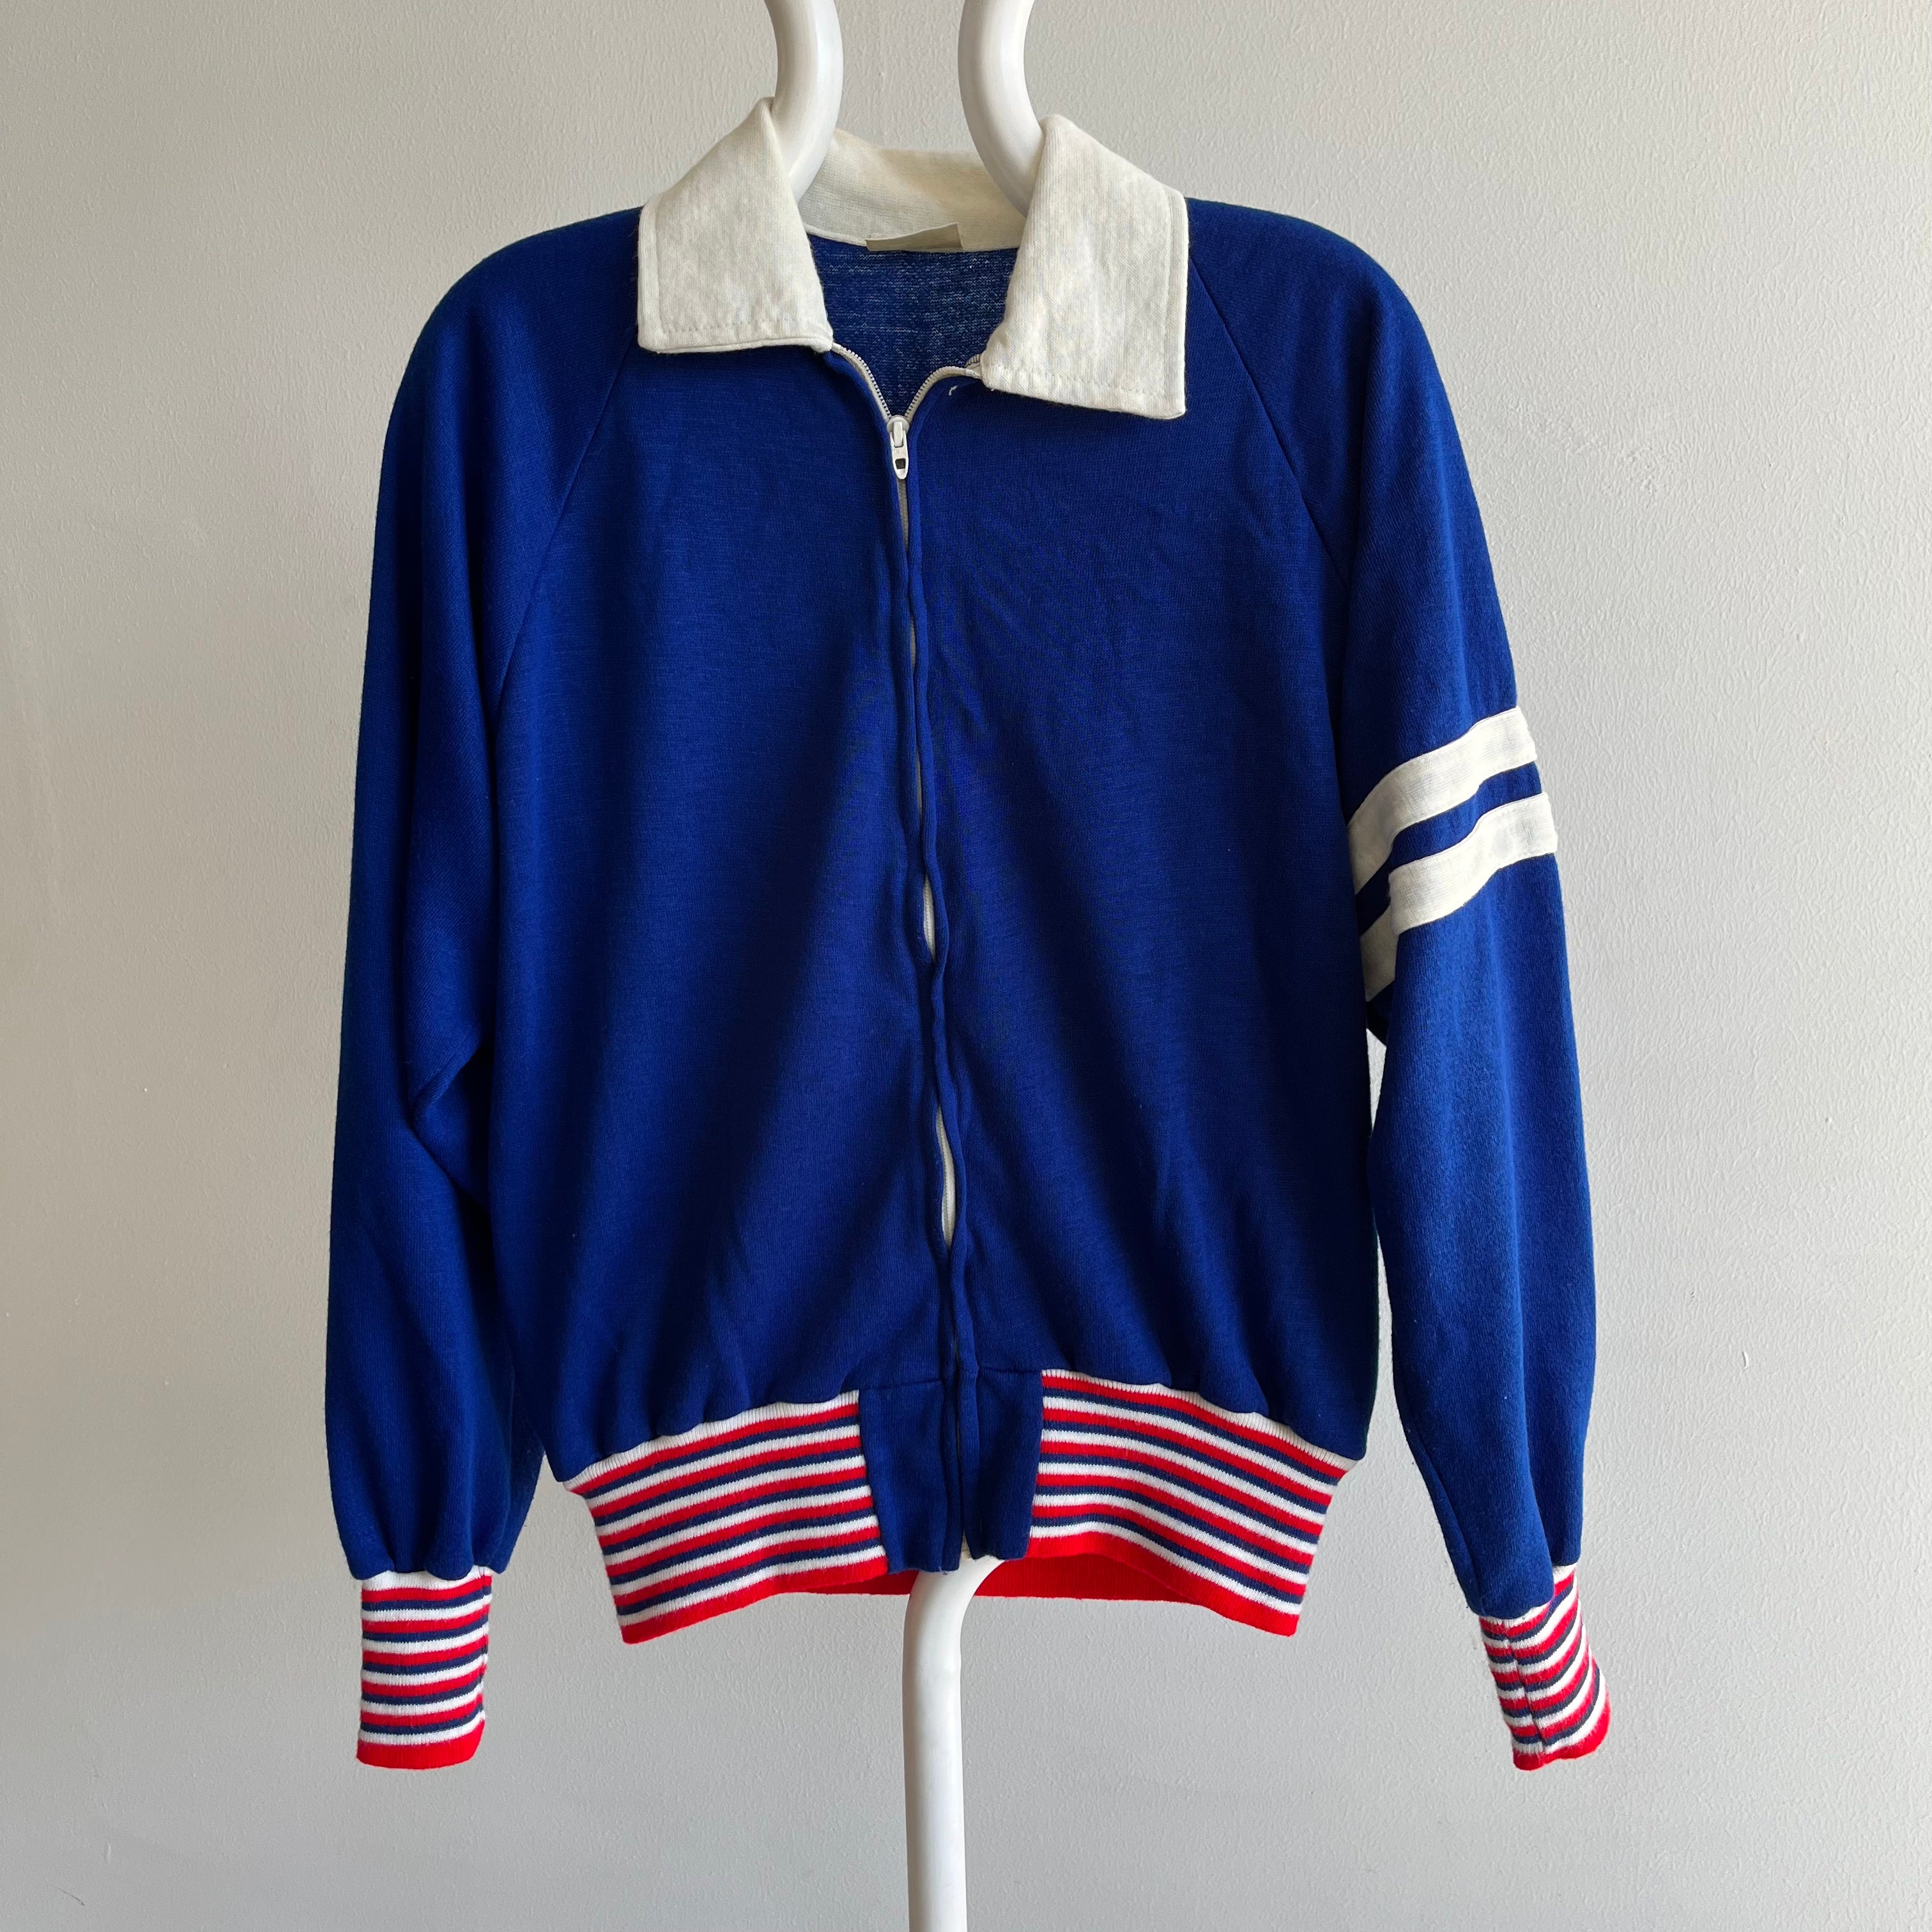 GG 1970s Kings Road par Sears Super Rad/Soft Collared Zip Up